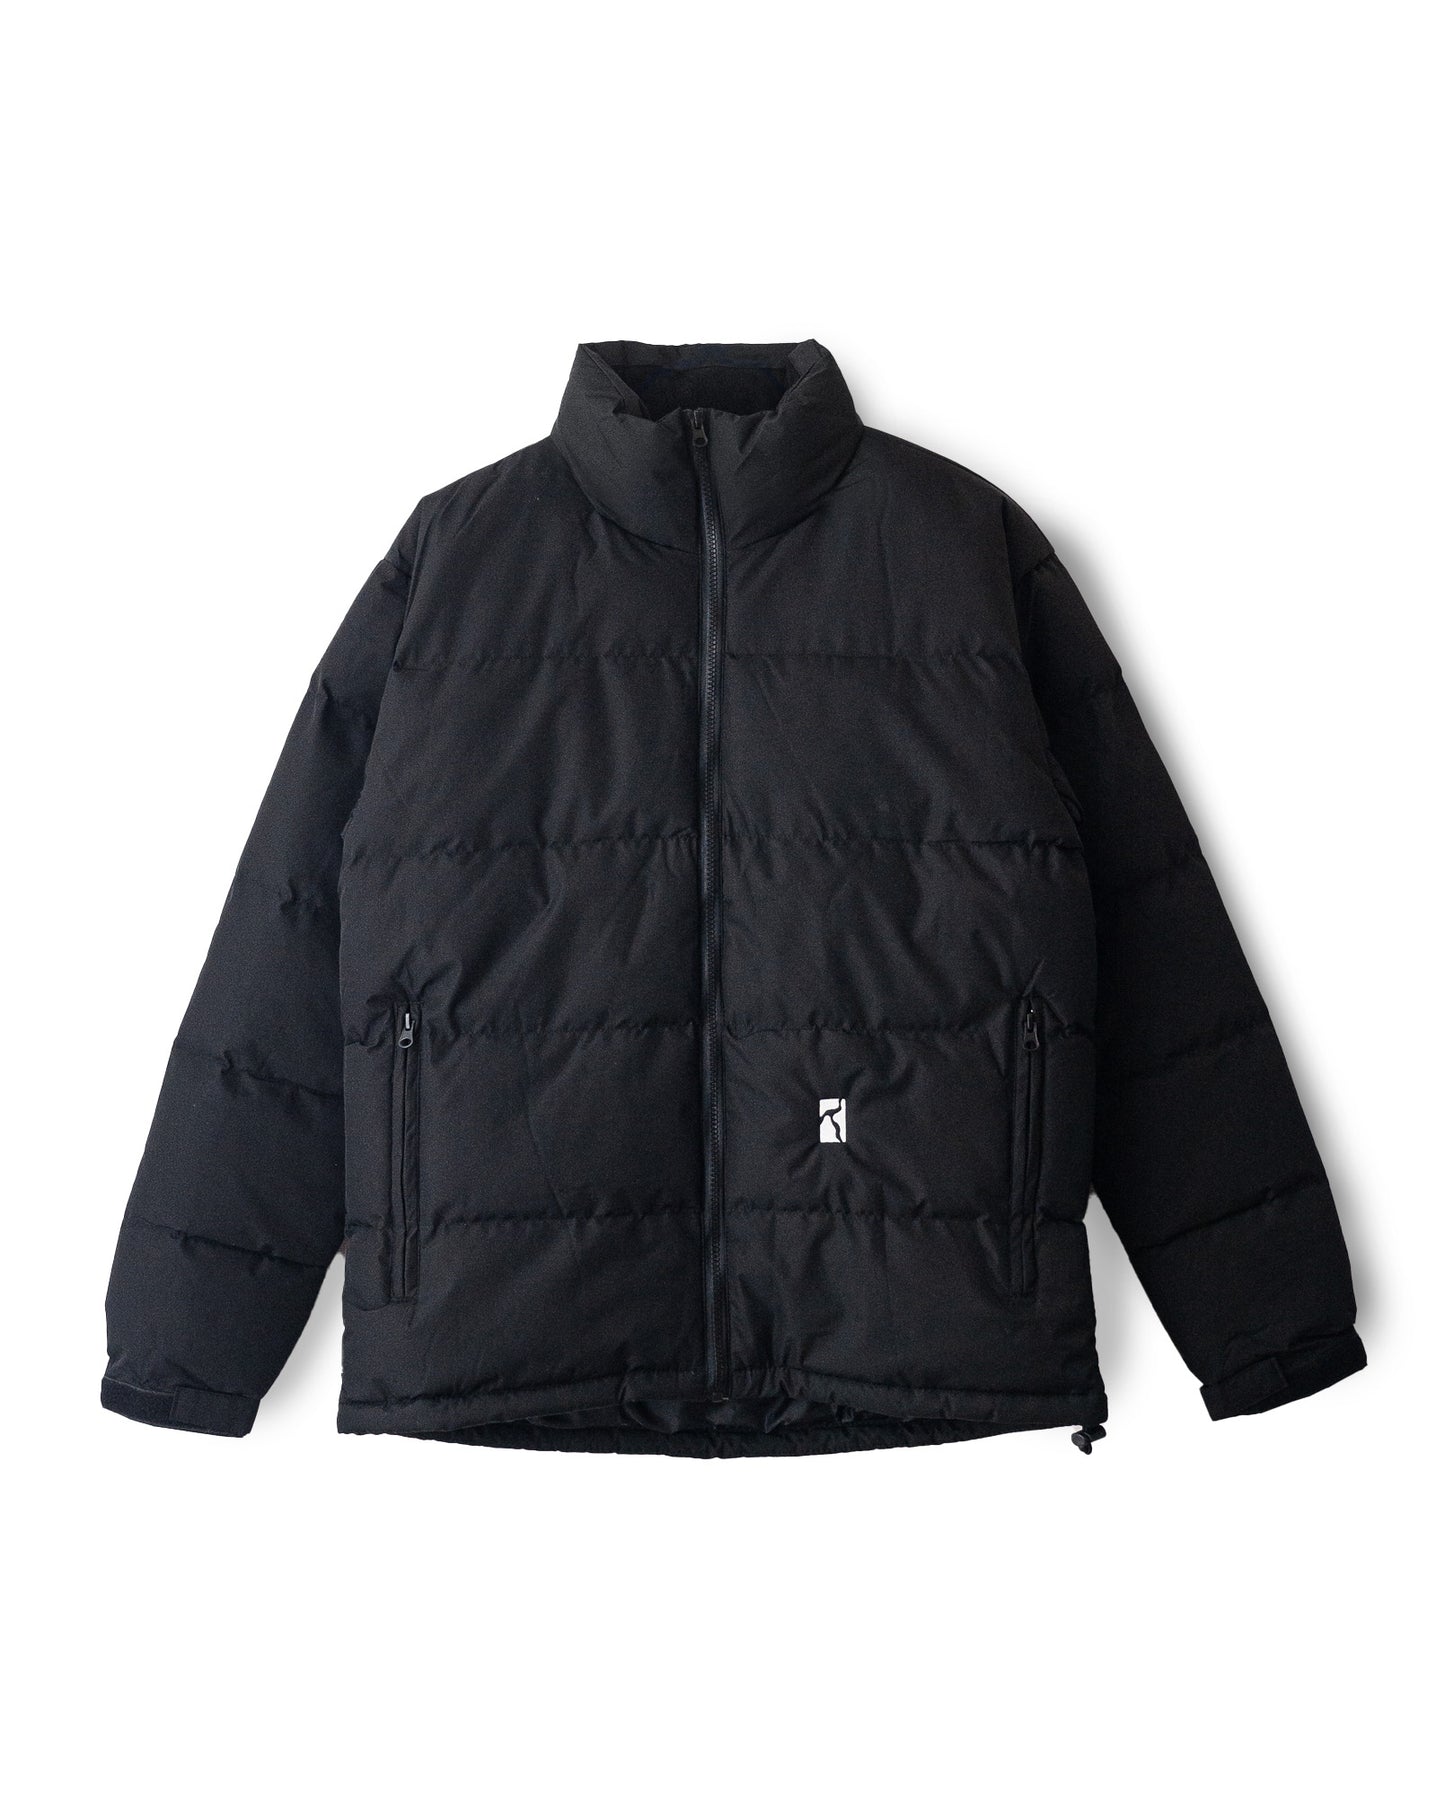 Poetic Collective - Puffer Jacket Black